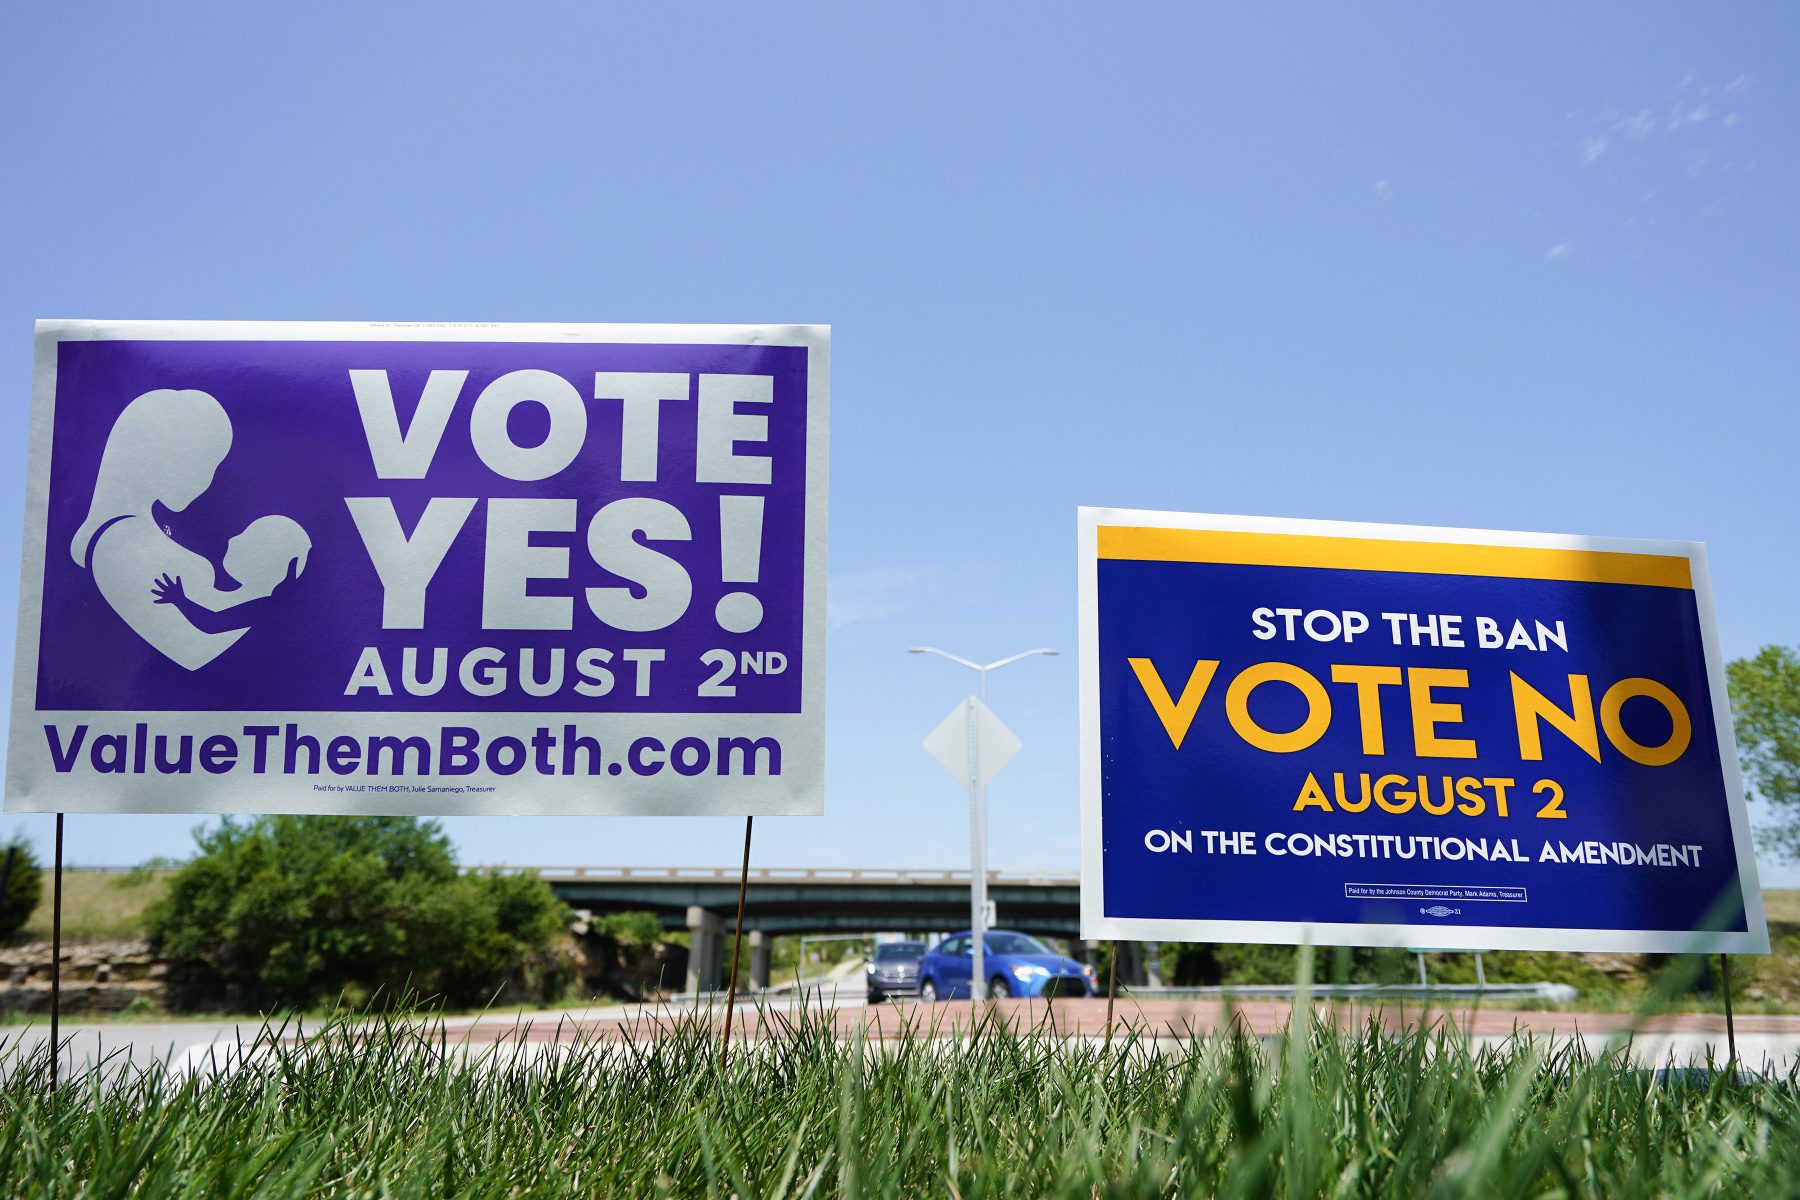 Two signs next to each other. A purple one reads "vote yes! August 2nd" with a silhouette of a person holding a baby. The other reads "stop the ban! Vote no August 2nd."